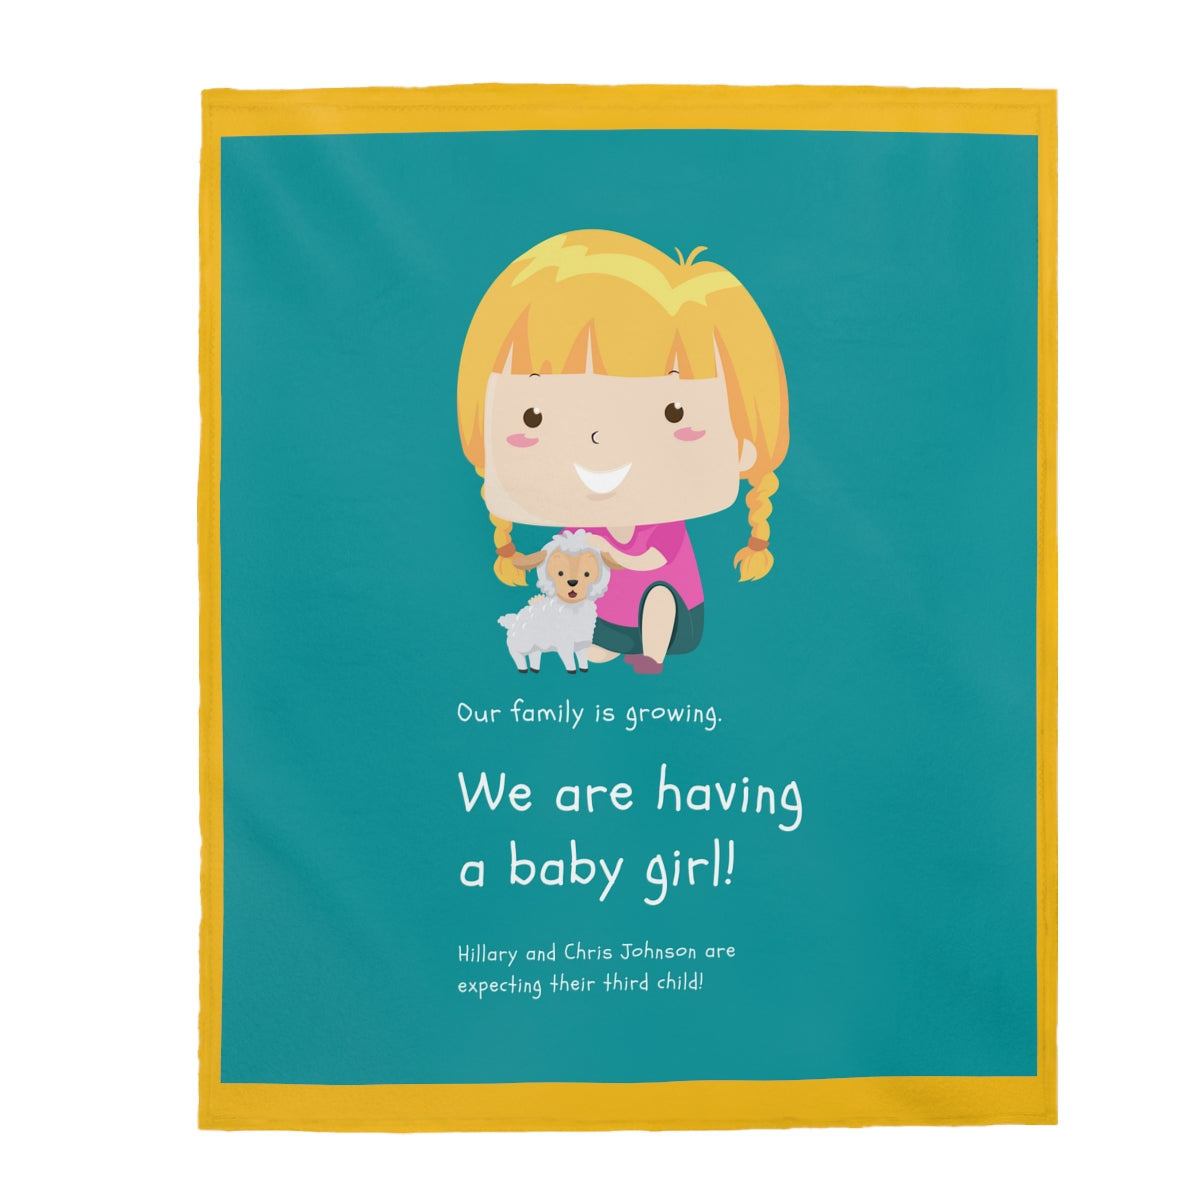 Baby and Expecting Parents Blankets Personalised,  -&-are having a Baby Theme Throw Blanket, Plush Super Soft Cozy Throw Blankets 3 Sizes, for kids and parents